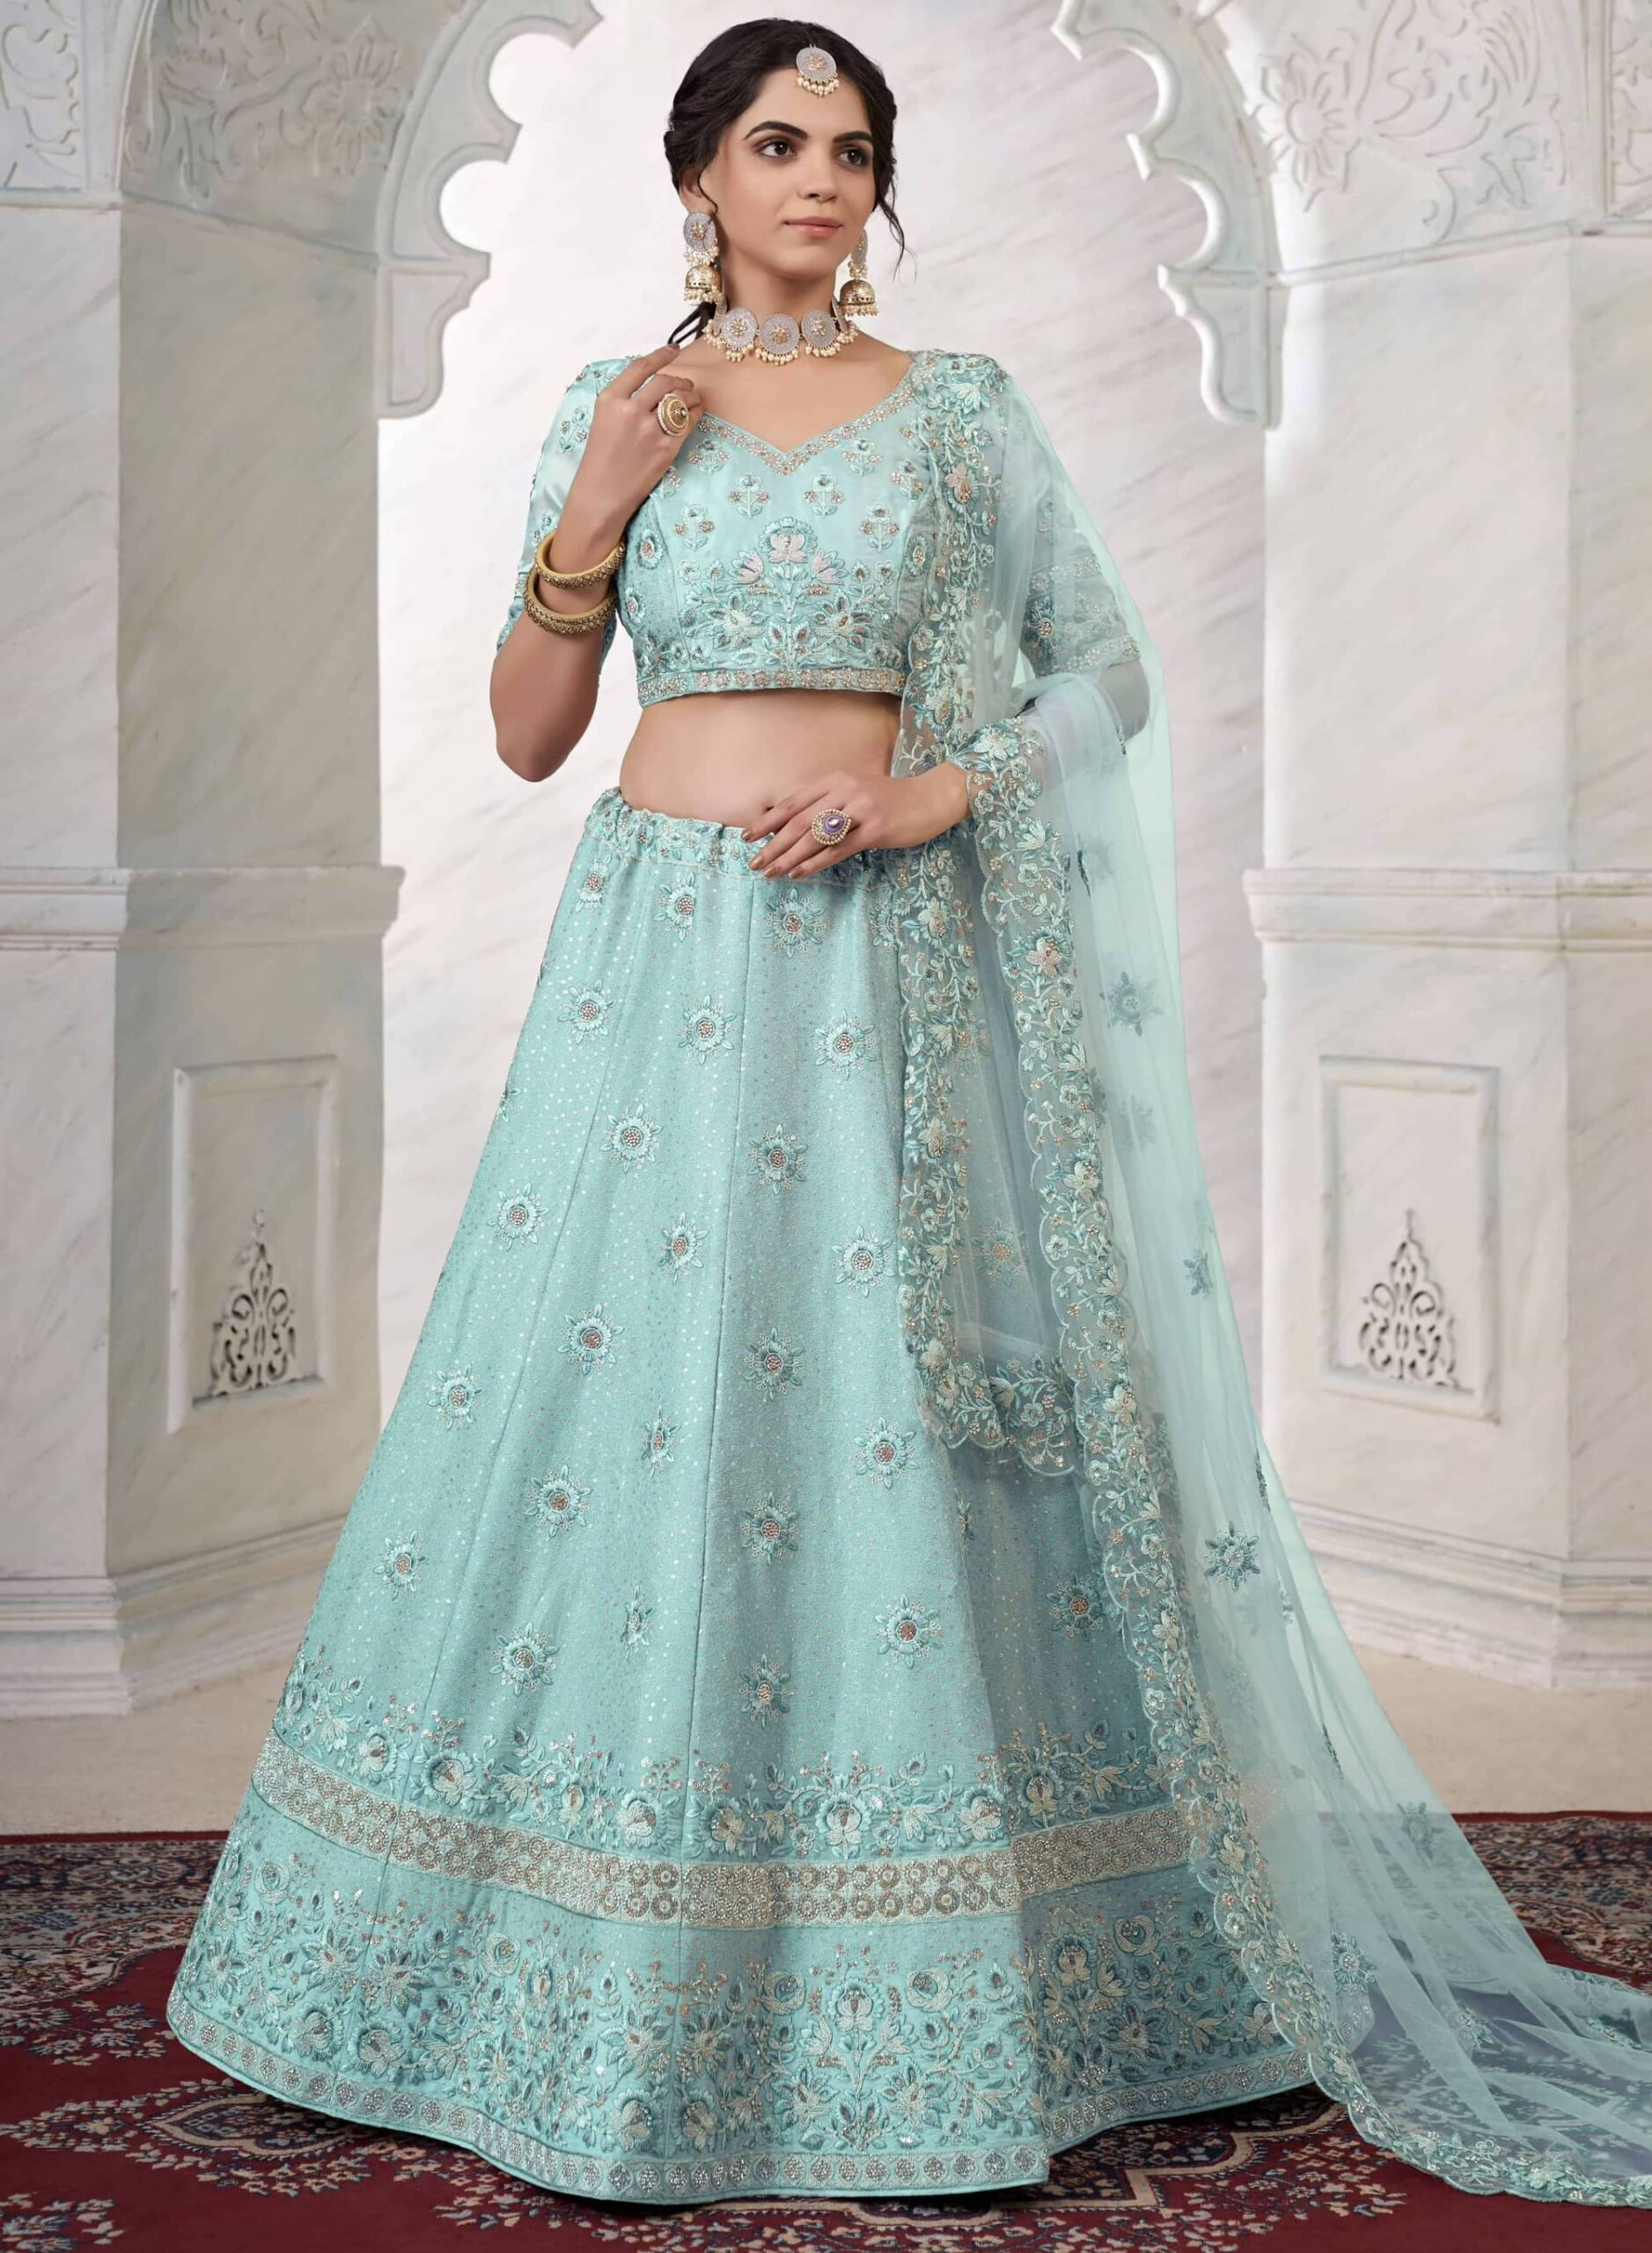 Gauri House – Best Collection of Ethnic and Wedding Wears